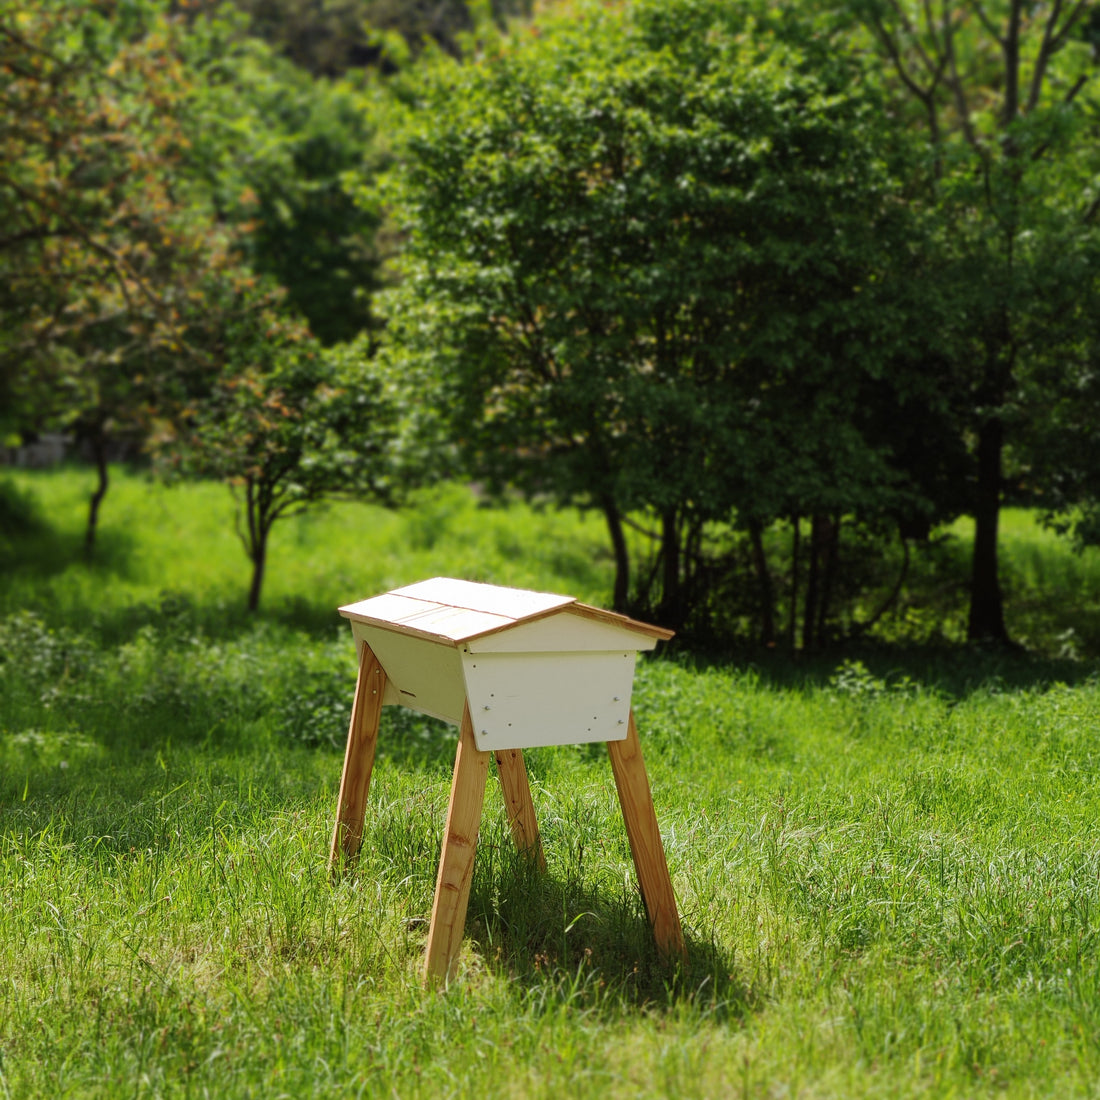 An Overview of Different Types of Beehives